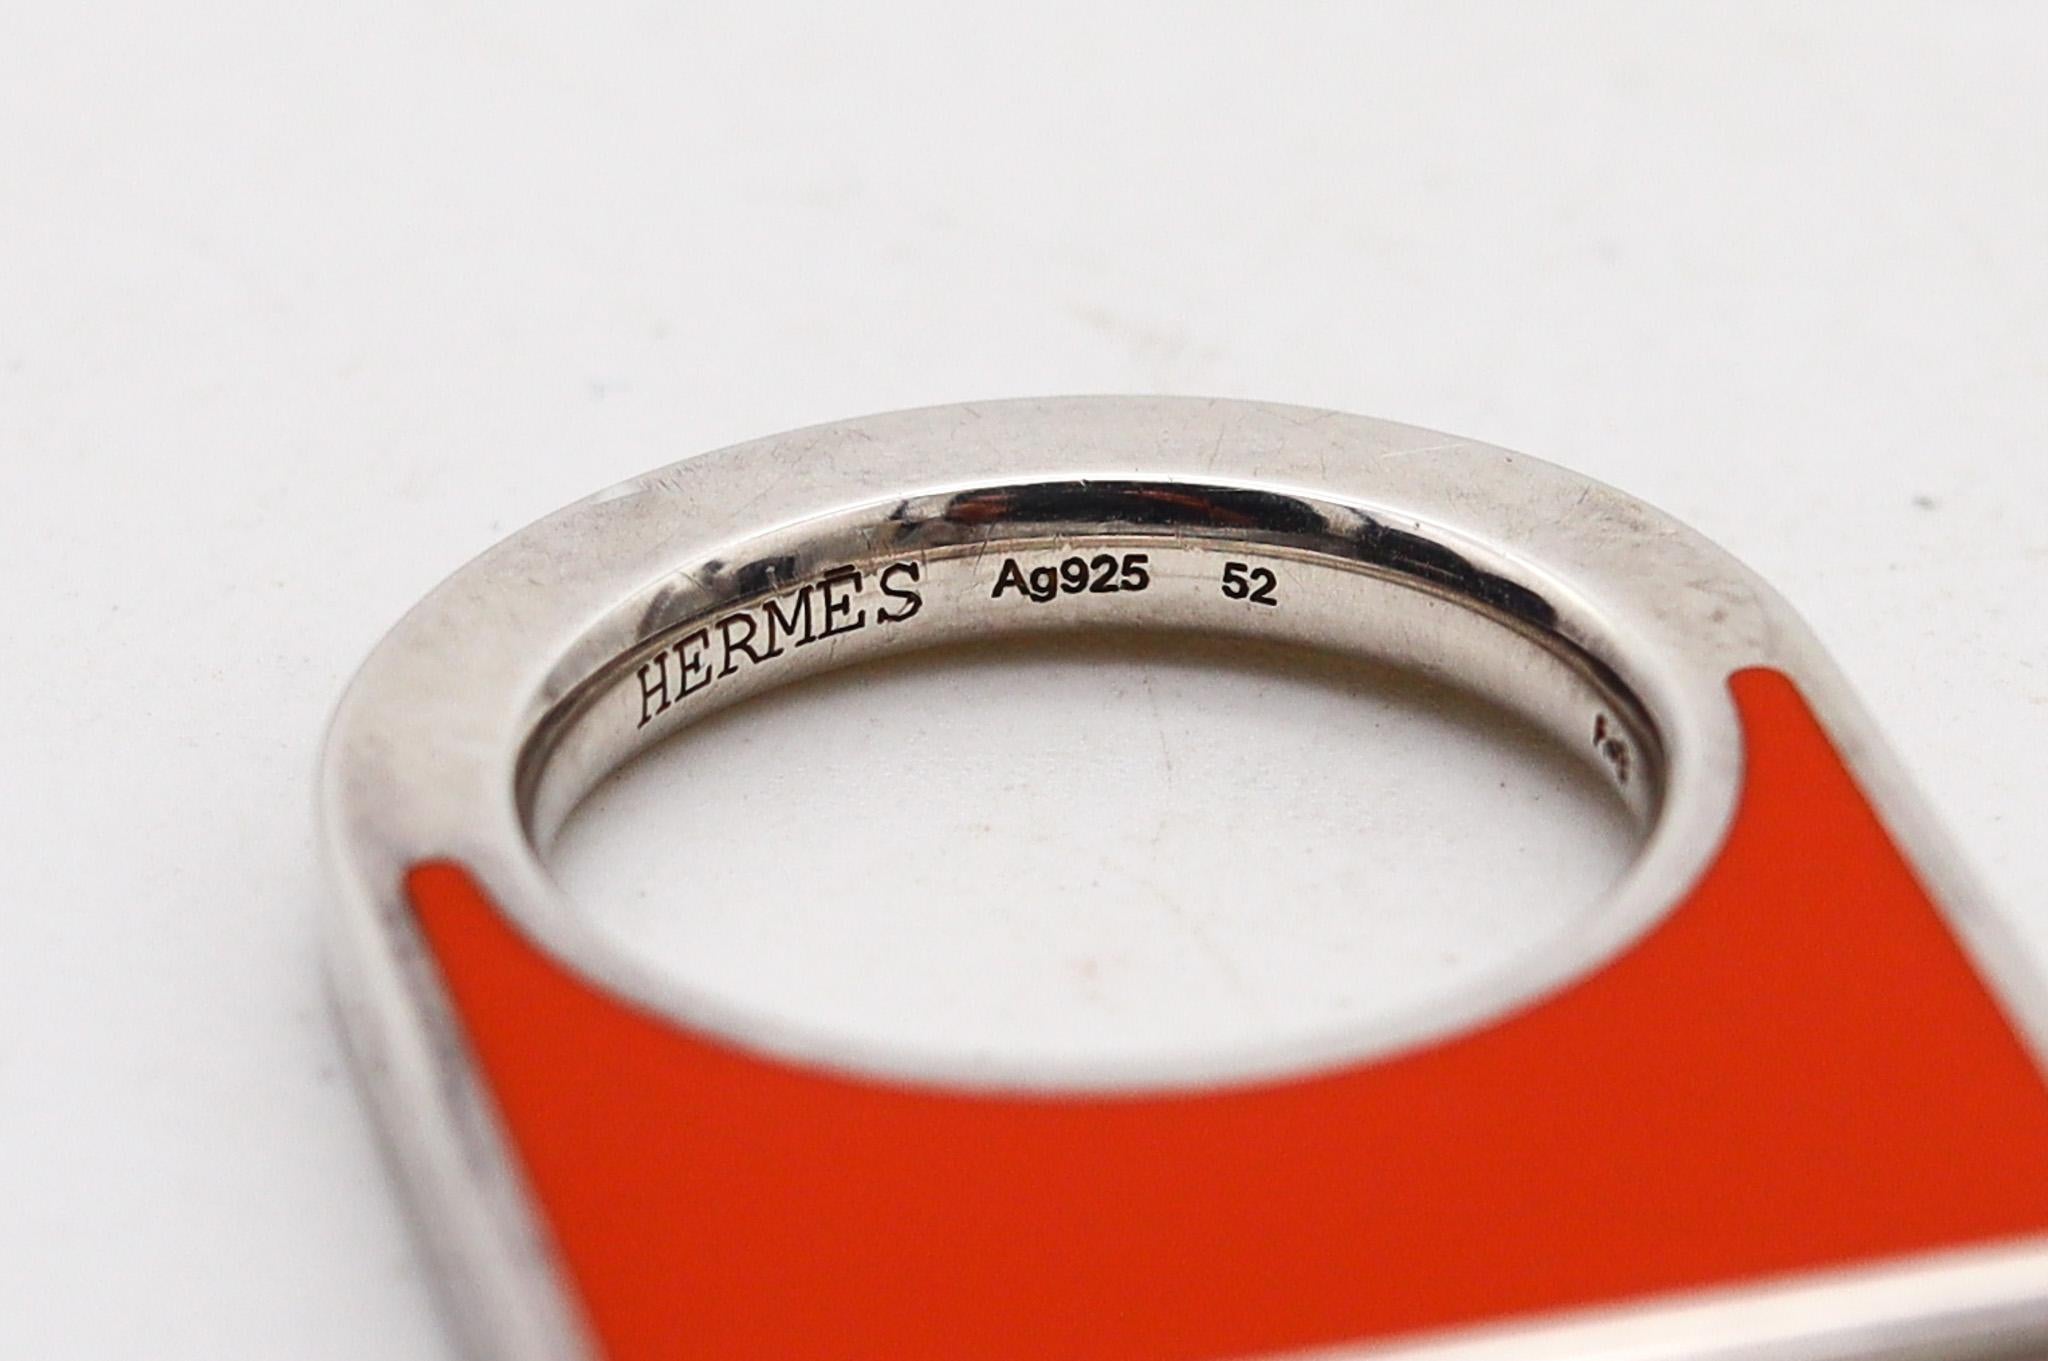 Geometric ring designed by Hermes.

A geometric flat ring, designed in Paris France by the iconic luxury house of Hermes. This ring is very rare and has been crafted with rectangular shape in solid sterling silver .925/.999 with very high polished